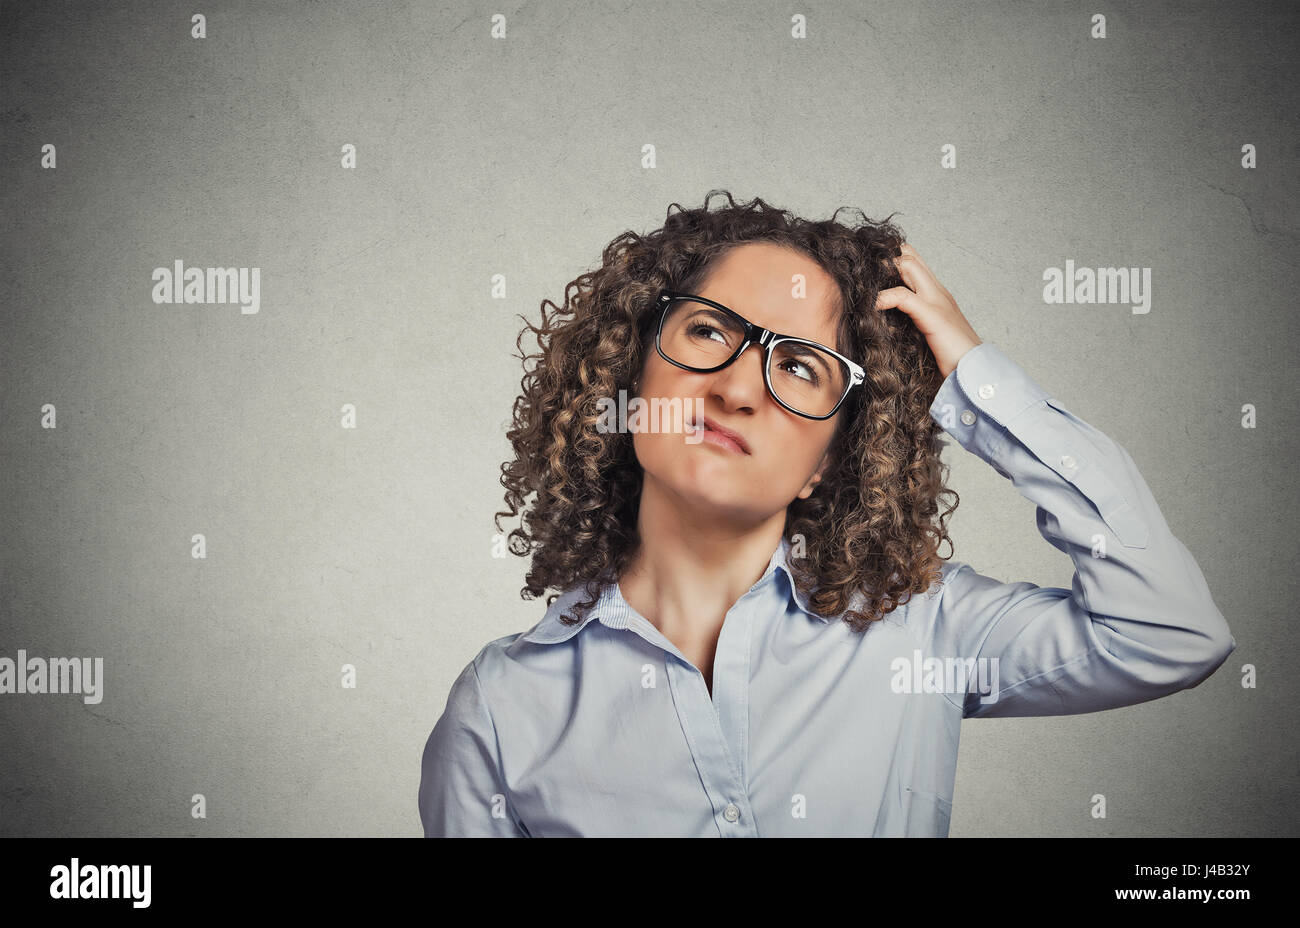 Closeup portrait young woman with glasses scratching head, thinking daydreaming something looking up isolated grey wall background. Human facial expre Stock Photo